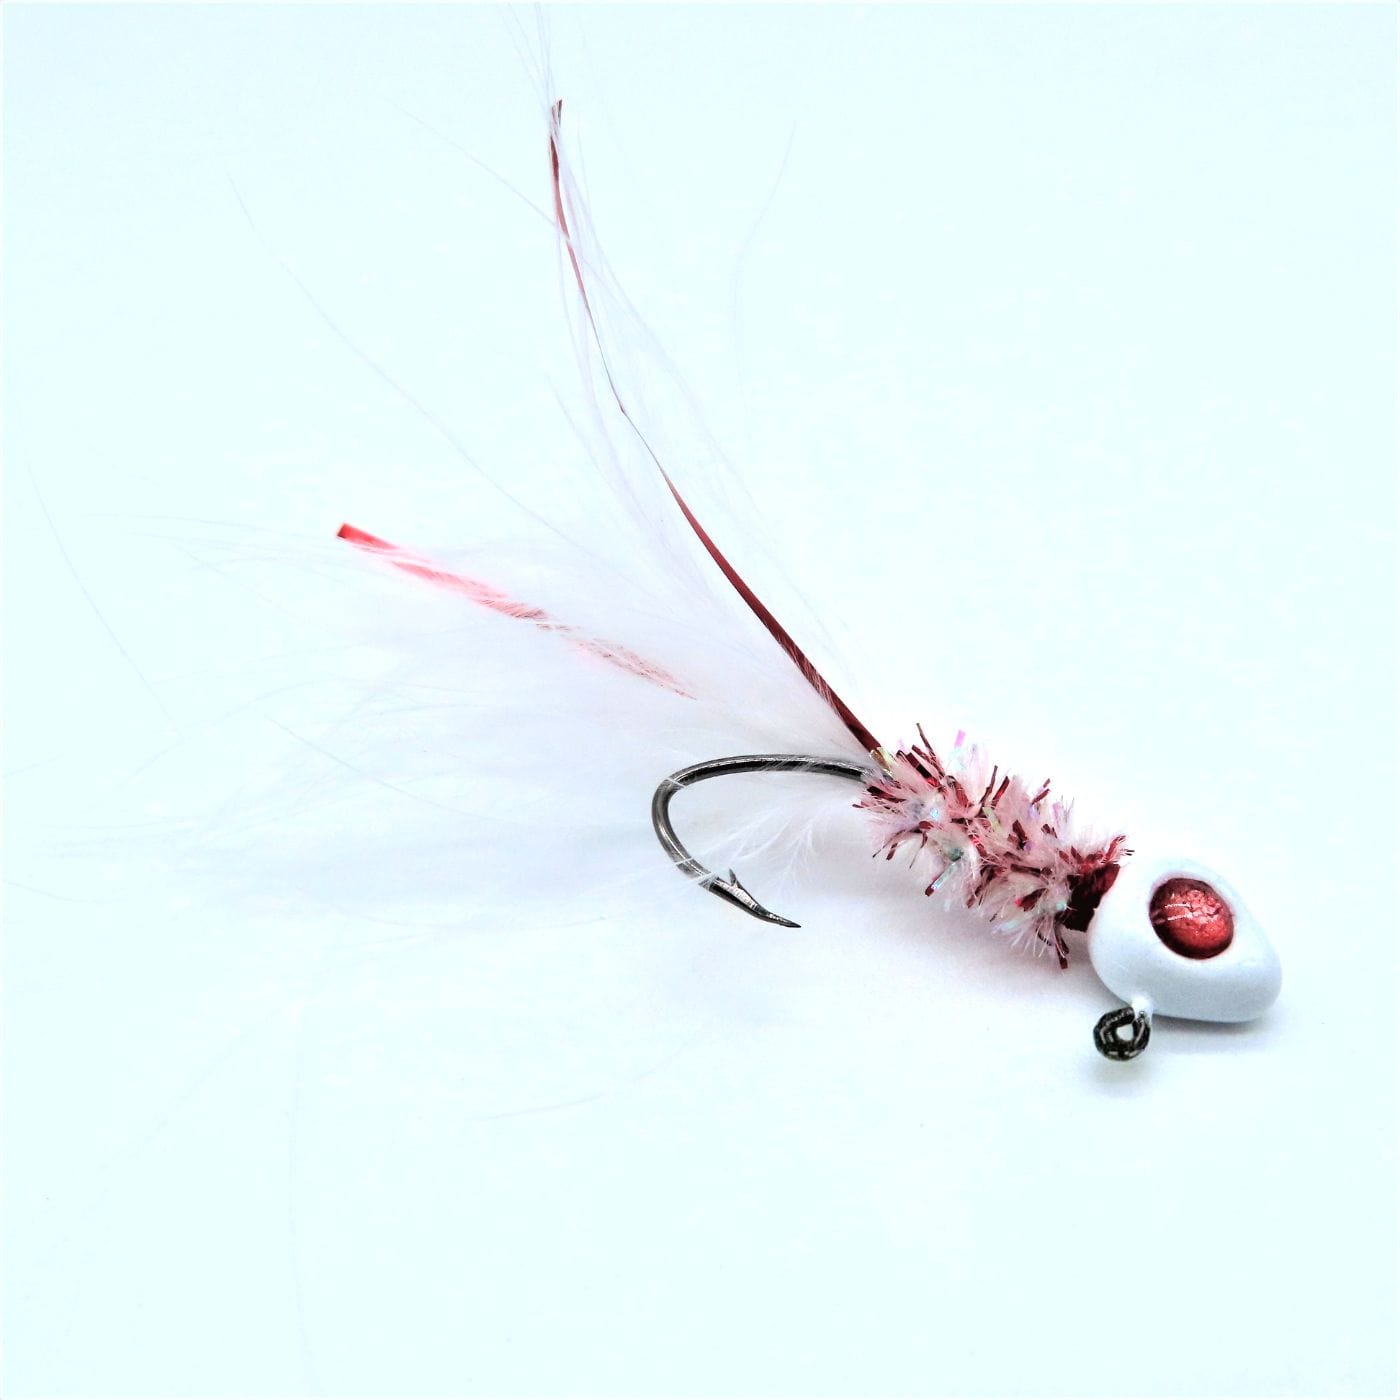 Hand tied Crappie jig featuring a white minnow head, red 3D eyes, white and red bleeding minnow body chenille, white marabou tail, and red flash. Hand tied onto a #4 Mustad sickle hook by Ramble Tamble Tackle.